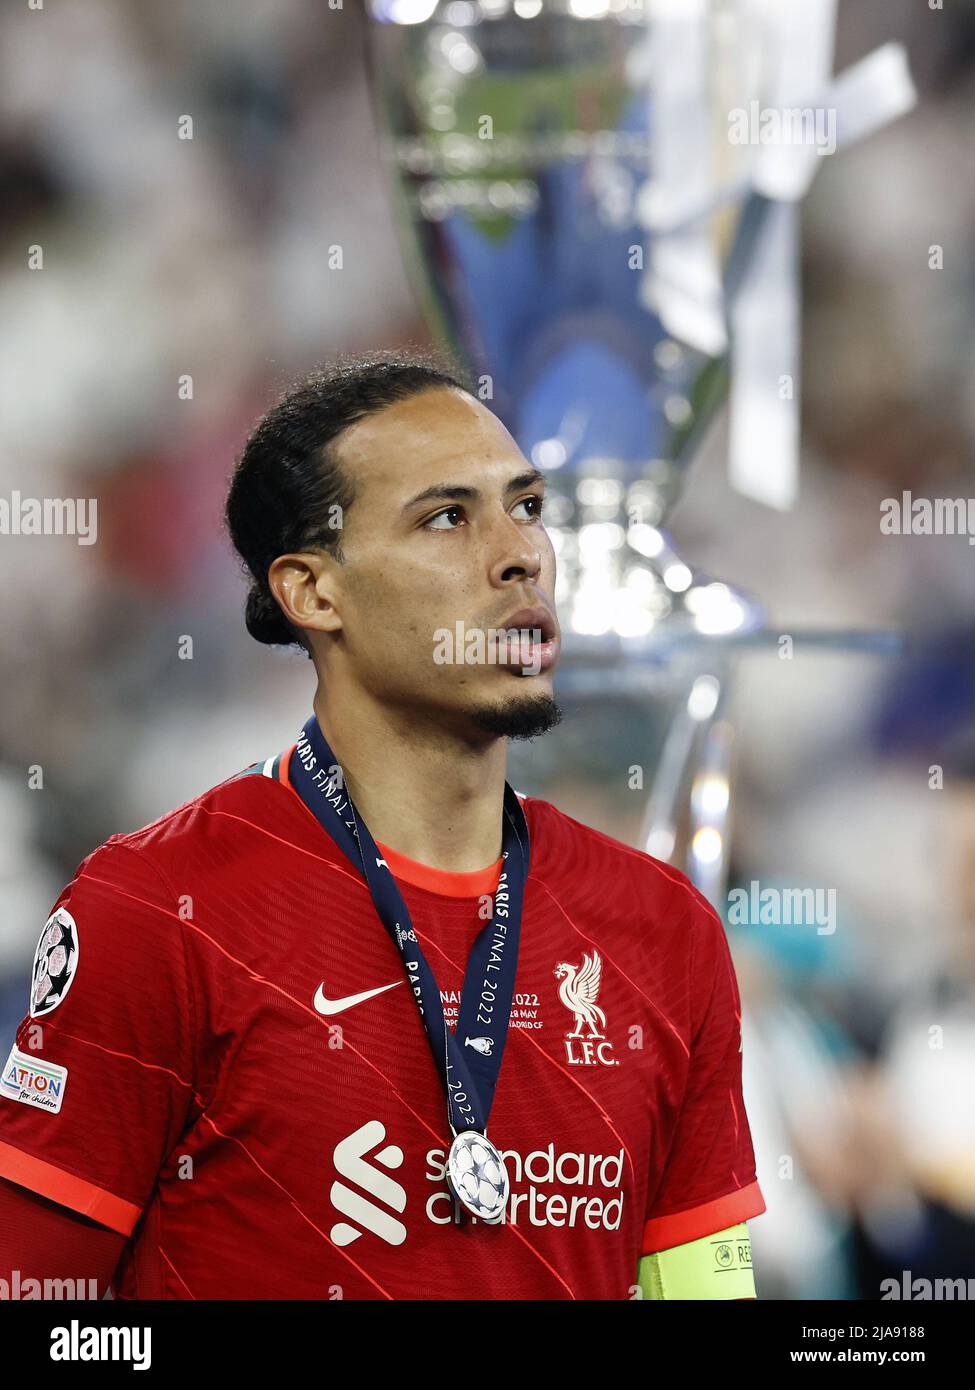 Paris, France. 28th May, 2022. PARIS - Virgil van Dijk of Liverpool FC  during the UEFA Champions League final match between Liverpool FC and Real  Madrid at Stade de Franc on May